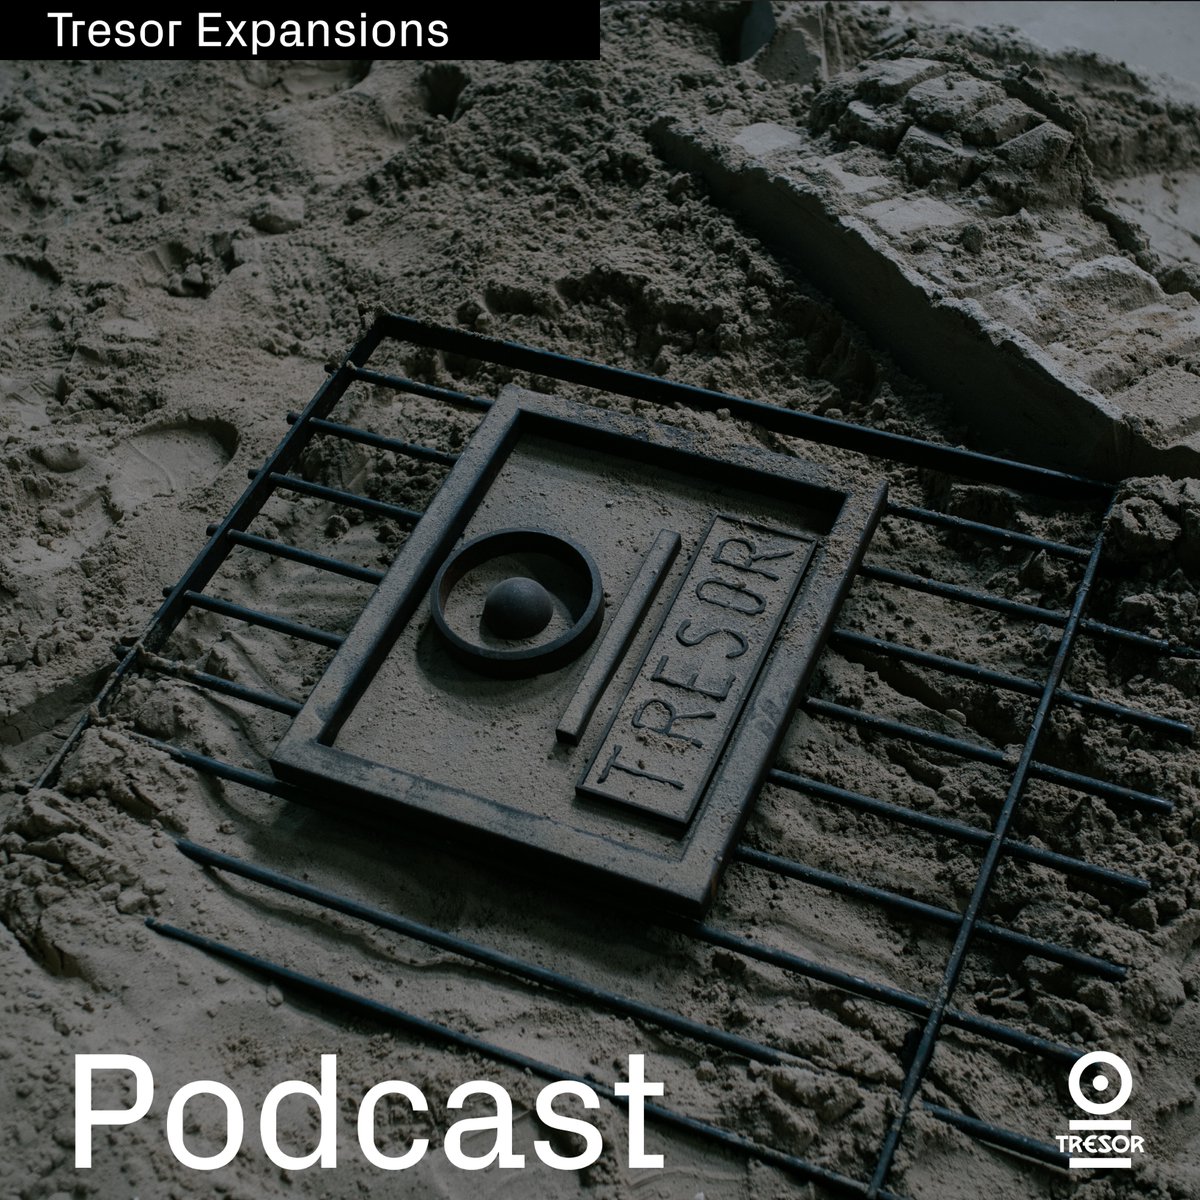 Tresor Expansions is a monthly podcast series, hosted by Chloe Lula, with guests from Berlin, Detroit and beyond. The first episode with the late Juan Mendez aka Silent Servant is out on Apple, Spotify and Soundcloud.⁠ Listen: pods.link/tresor-expansi…